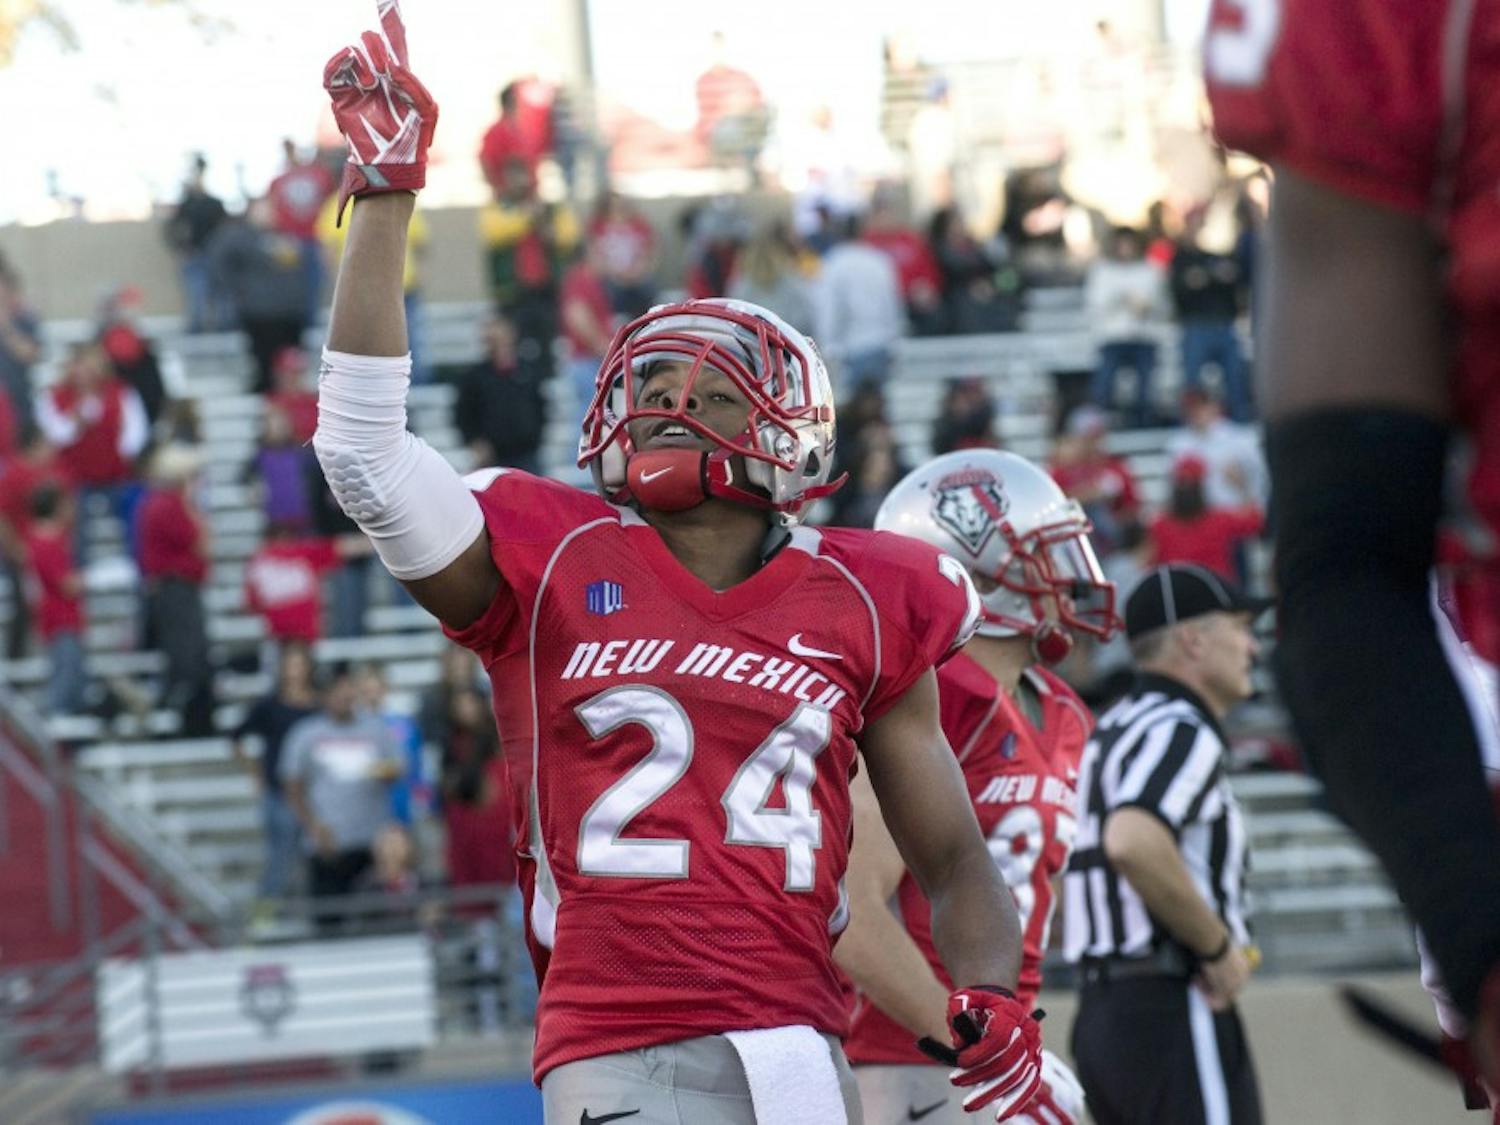 New Mexico wide receiver Carlos Wiggins celebrates after scoring the touchdown that gave the Lobos the lead during the game against Wyoming on Saturday. Wigginsâ€™ 97 yards kickoff return for the touchdown was the fourth of his career, a school and Mountain West record.